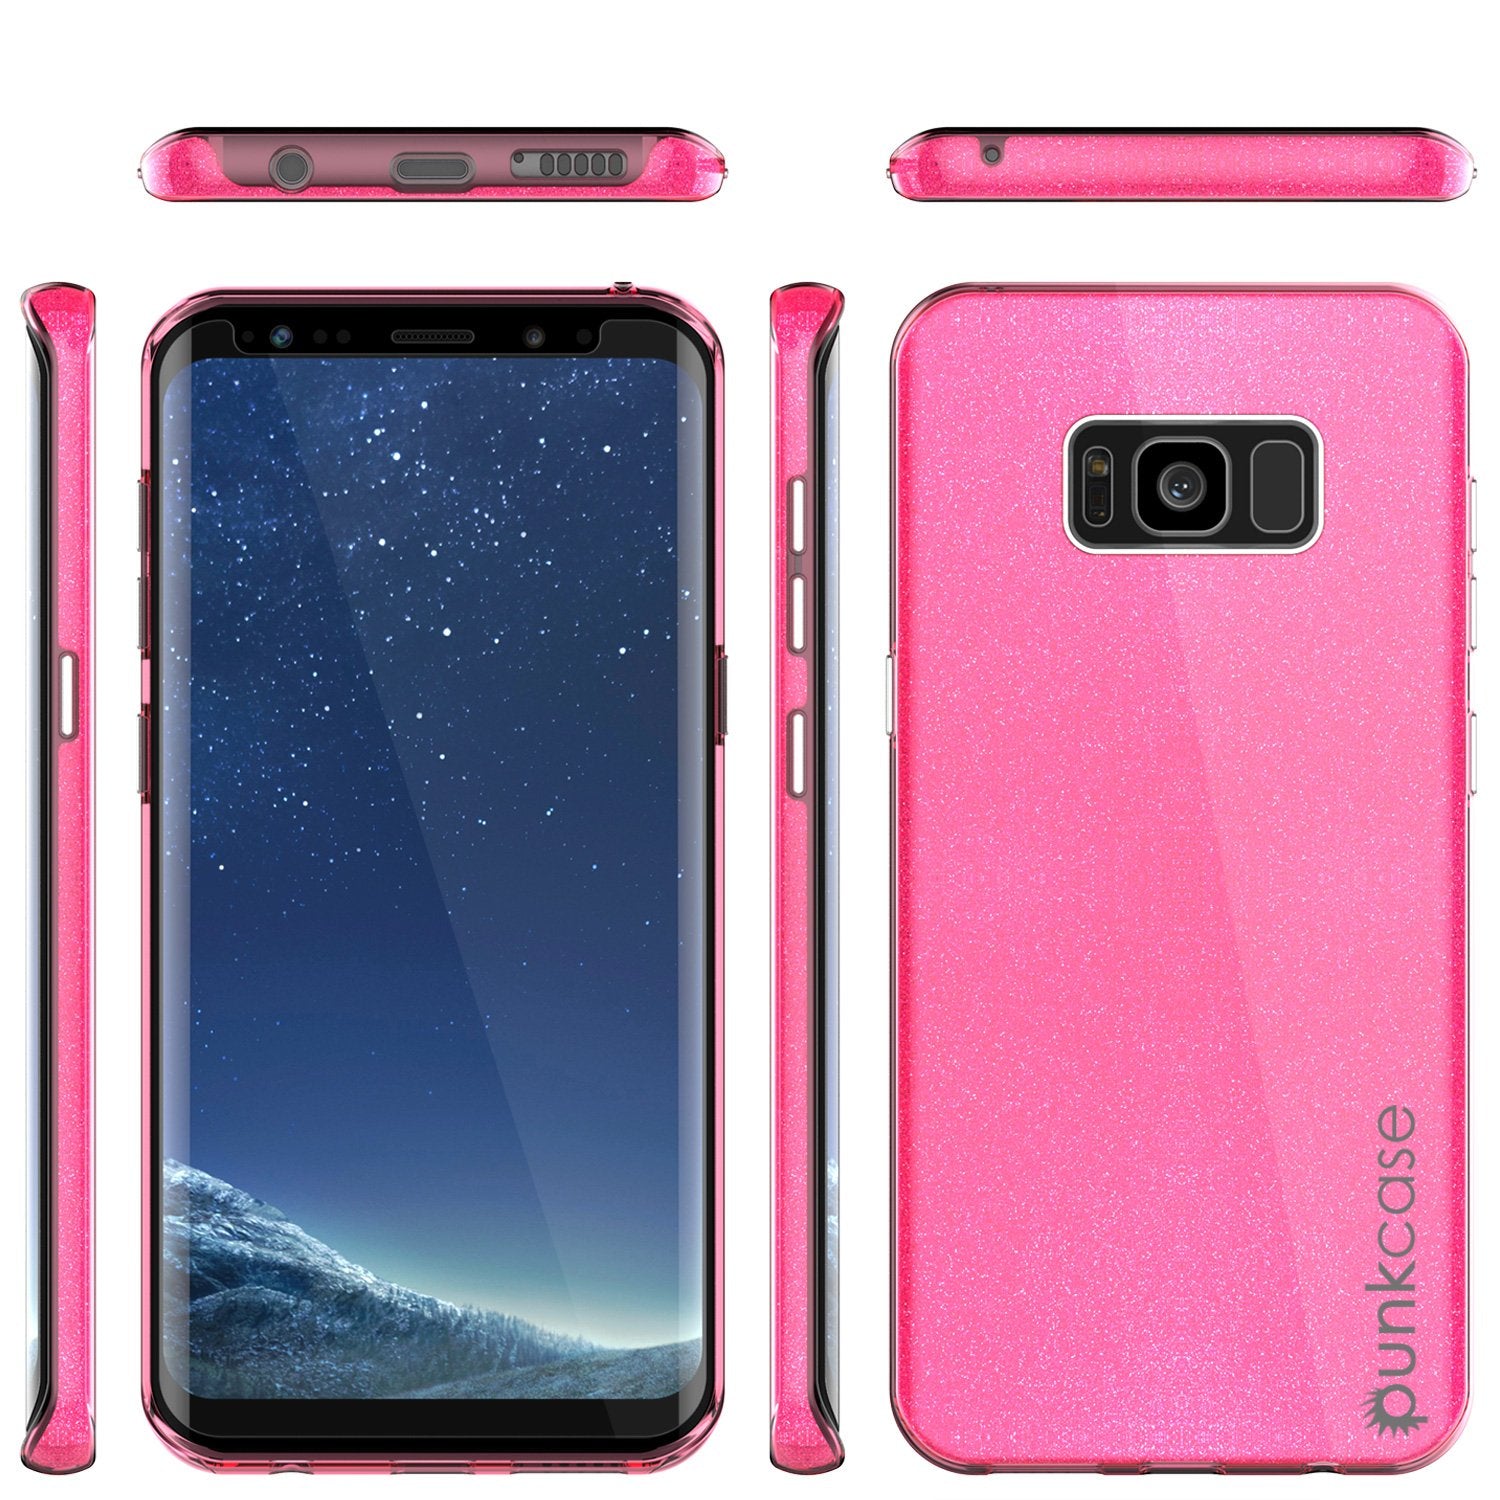 Galaxy S8 Plus Case, Punkcase Galactic 2.0 Series Ultra Slim Protective Armor TPU Cover [Pink] - PunkCase NZ